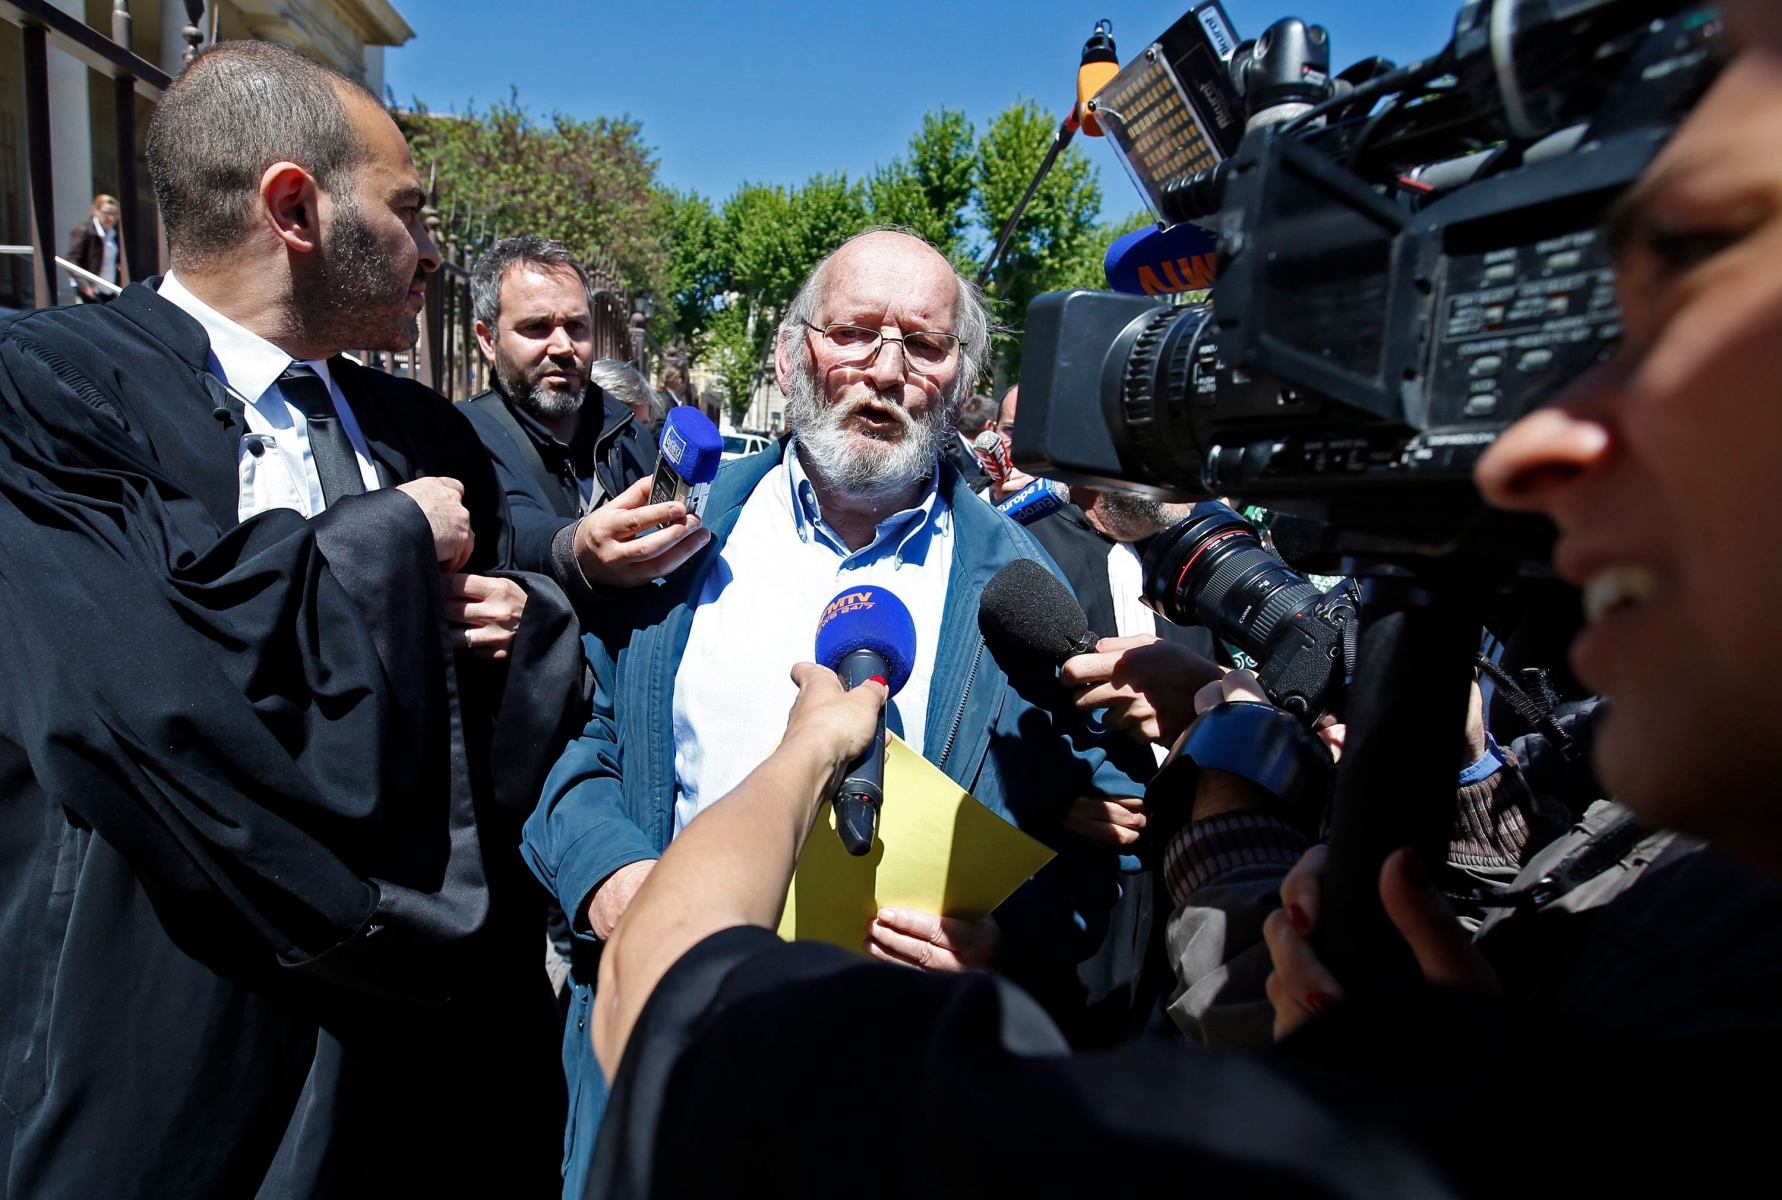 epa05287008 Jean Claude Mas, former head of Poly Implant Prothese (PIP) (C) leaves the appeal court of Aix-en-Provence, France, 02 May 2016. A French appeal court (confirmed) the sentence of Jean-Claude Mas who was found guilty of fraud on the worldwide sale of breast implants, sentenced to four years in prison and fined 75,000 euros in 2013 after a police investigation. Between 300,000 and 400,000 women in 65 countries from Europe to Latin America have implants made with the sub-standard gel.  EPA/GUILLAUME HORCAJUELO FRANCE TRIAL MAS BREAST IMPLANTS